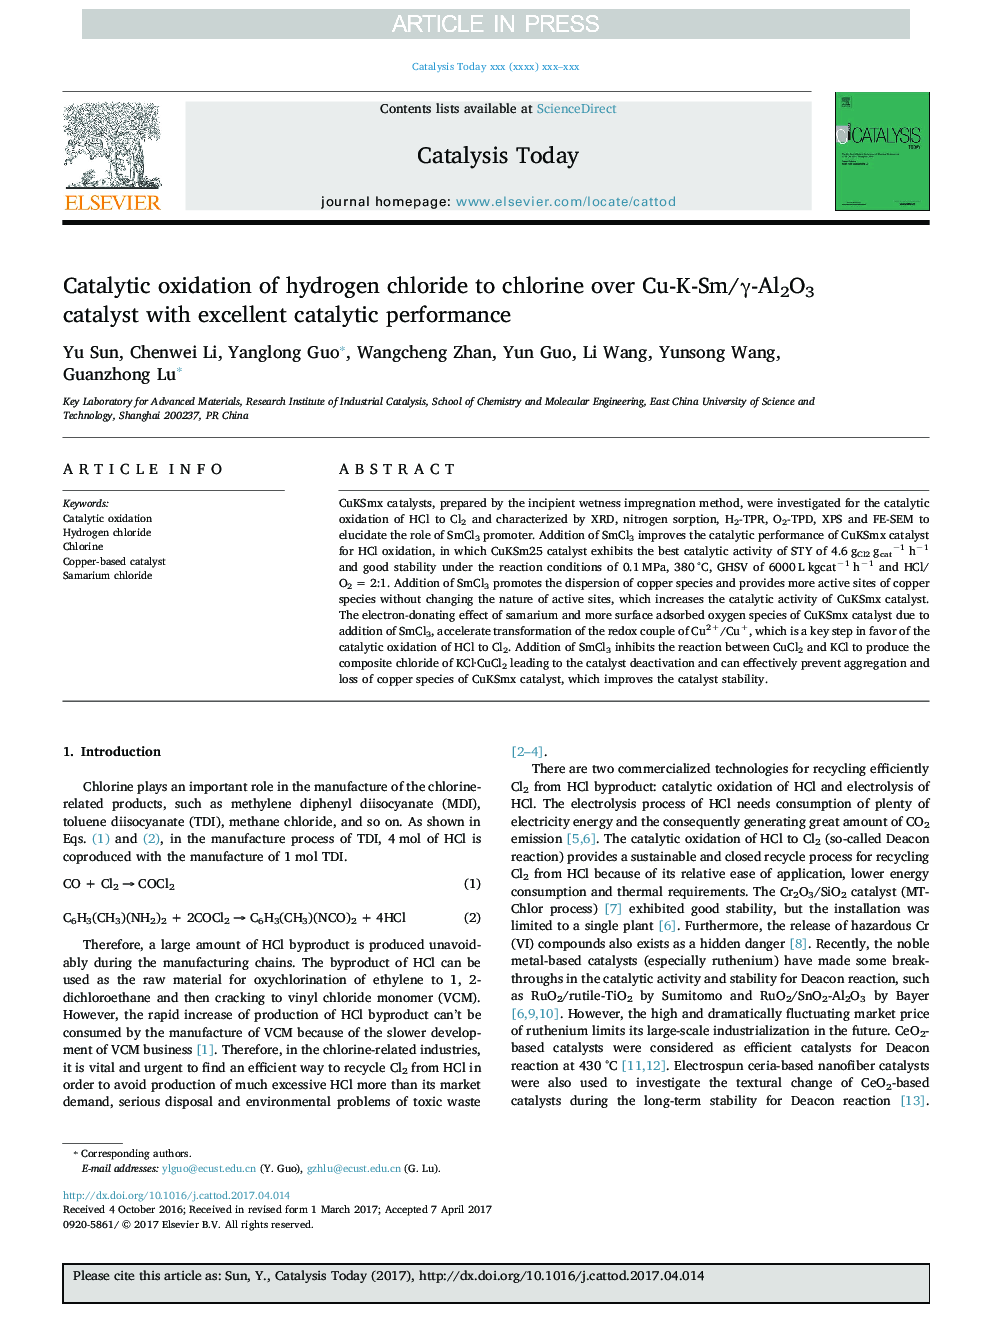 Catalytic oxidation of hydrogen chloride to chlorine over Cu-K-Sm/Î³-Al2O3 catalyst with excellent catalytic performance